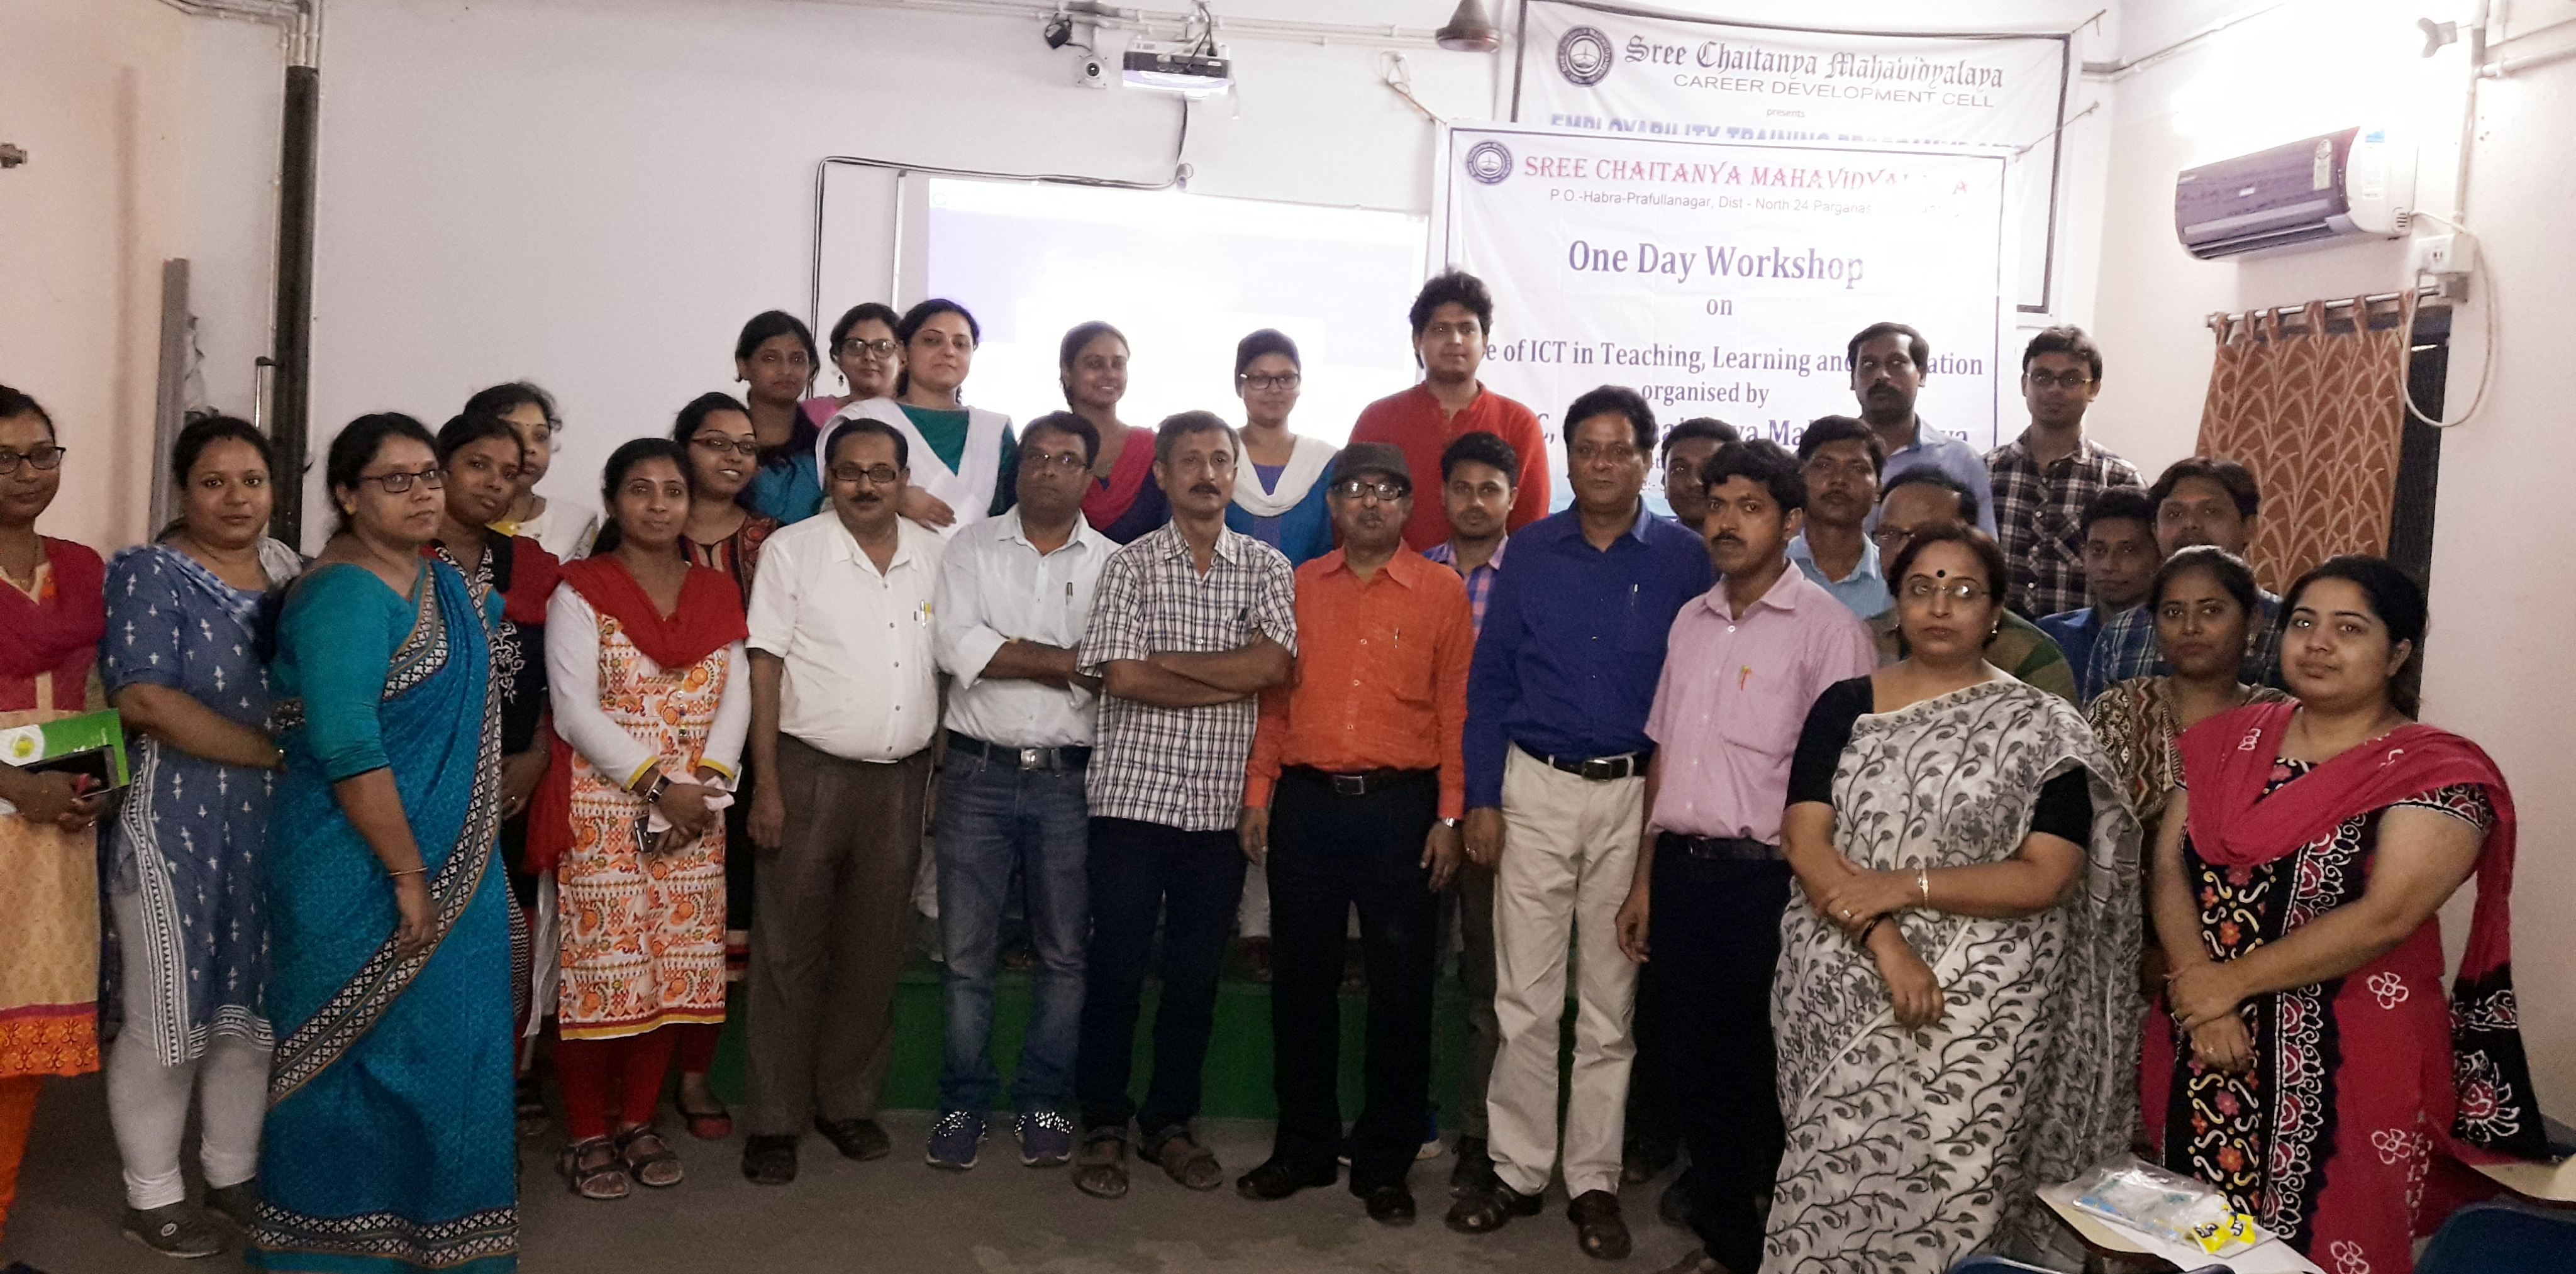 One Day Workshop on ICT Based Teaching, Learning and Evalution Organized By IQAC, SCM, 04-06-2019